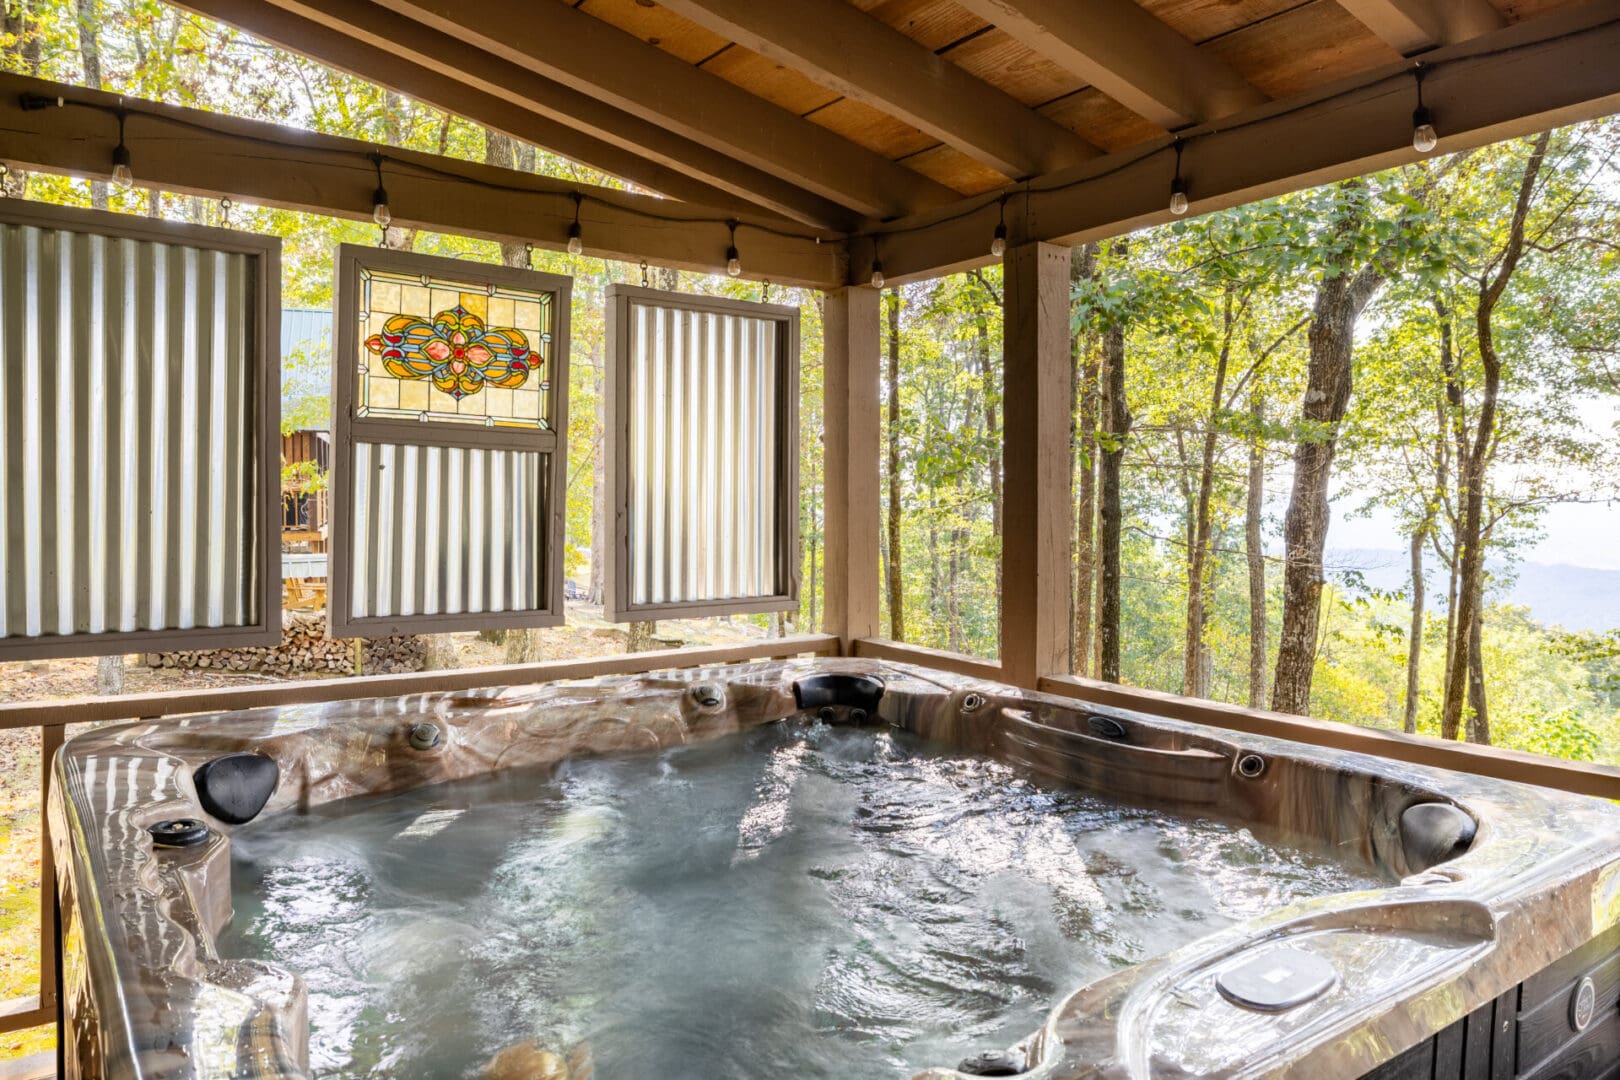 A hot tub on a deck overlooking the woods.